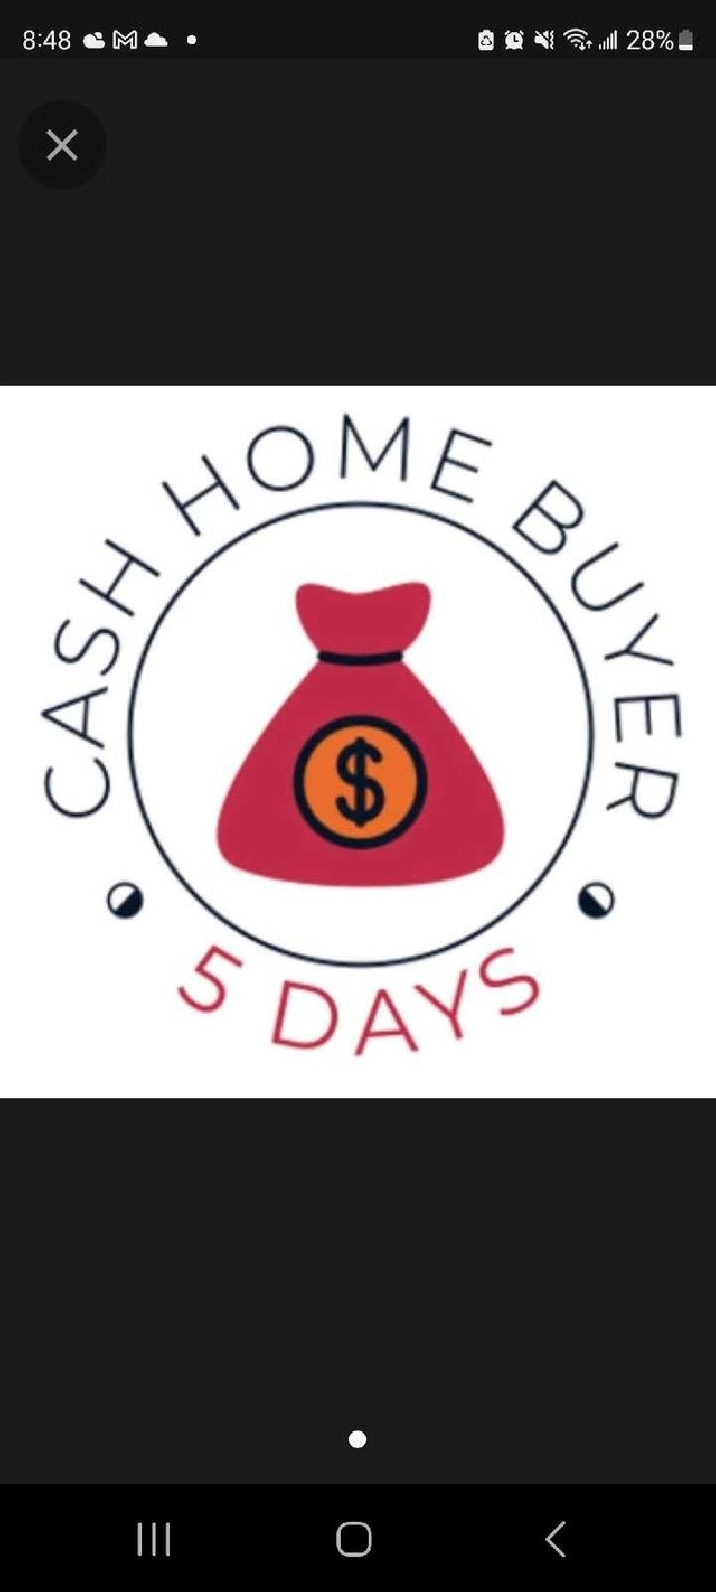 ⭐️⭐️⭐️⭐️⭐️ Sell Fast for cash in Calgary,AB - Houses for Sale